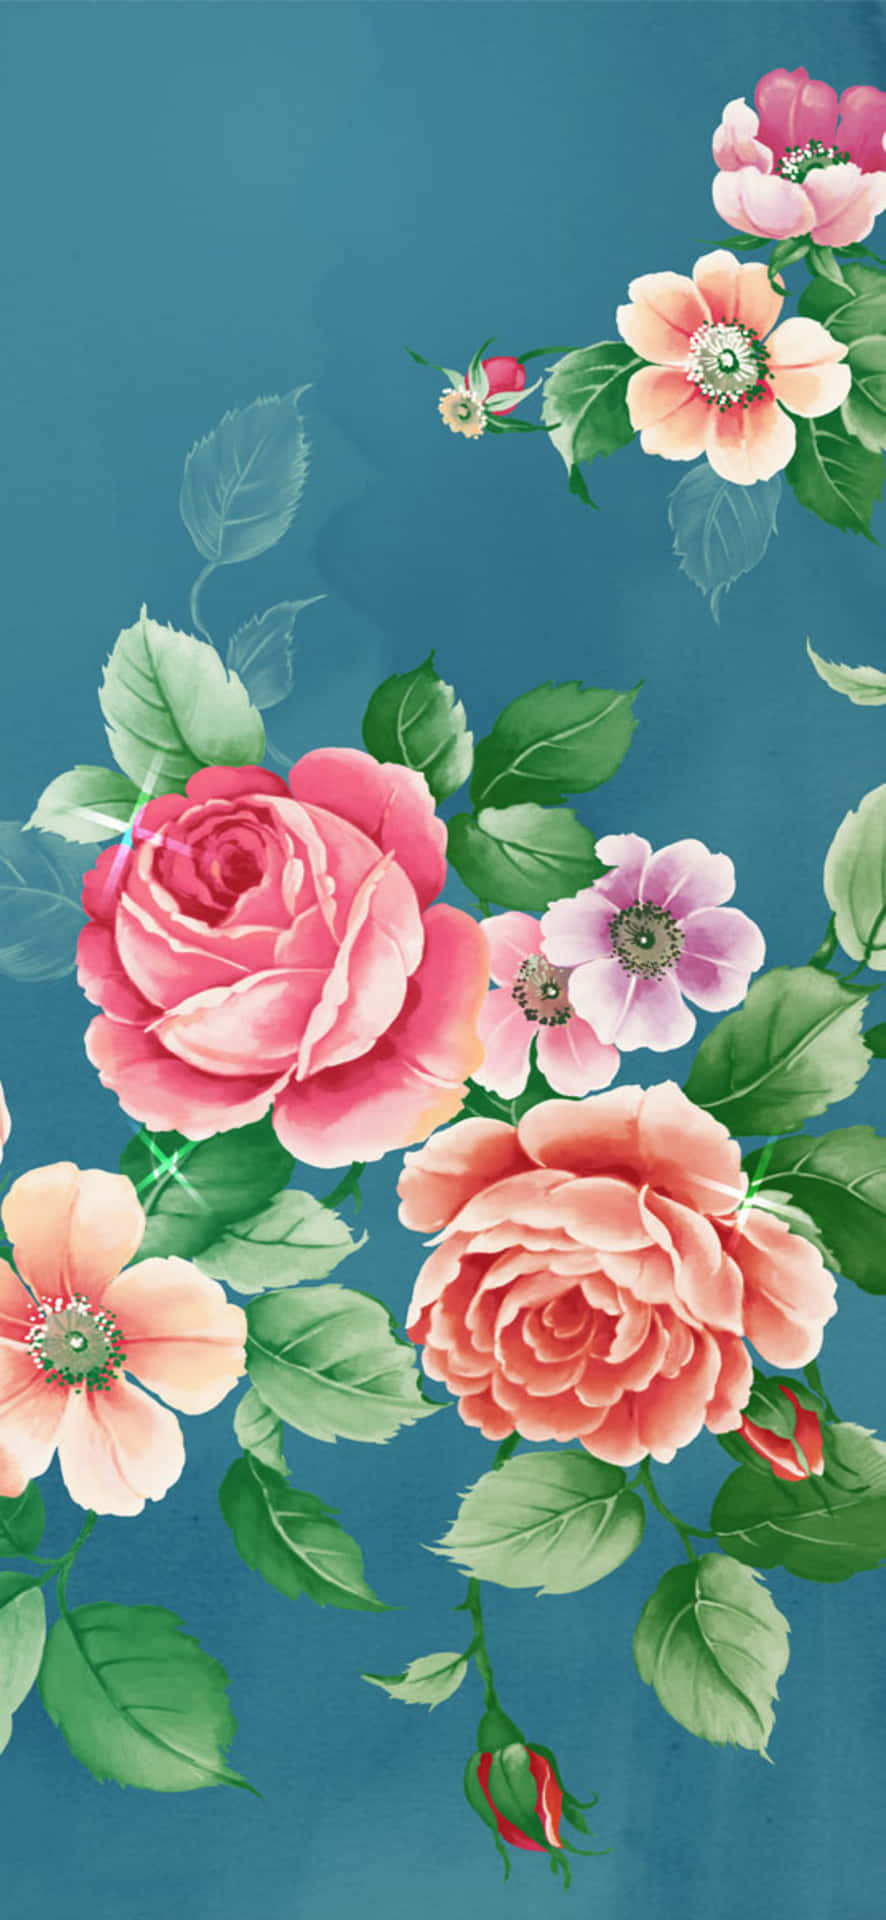 Colorful Floral Art Aesthetic Wallpaper